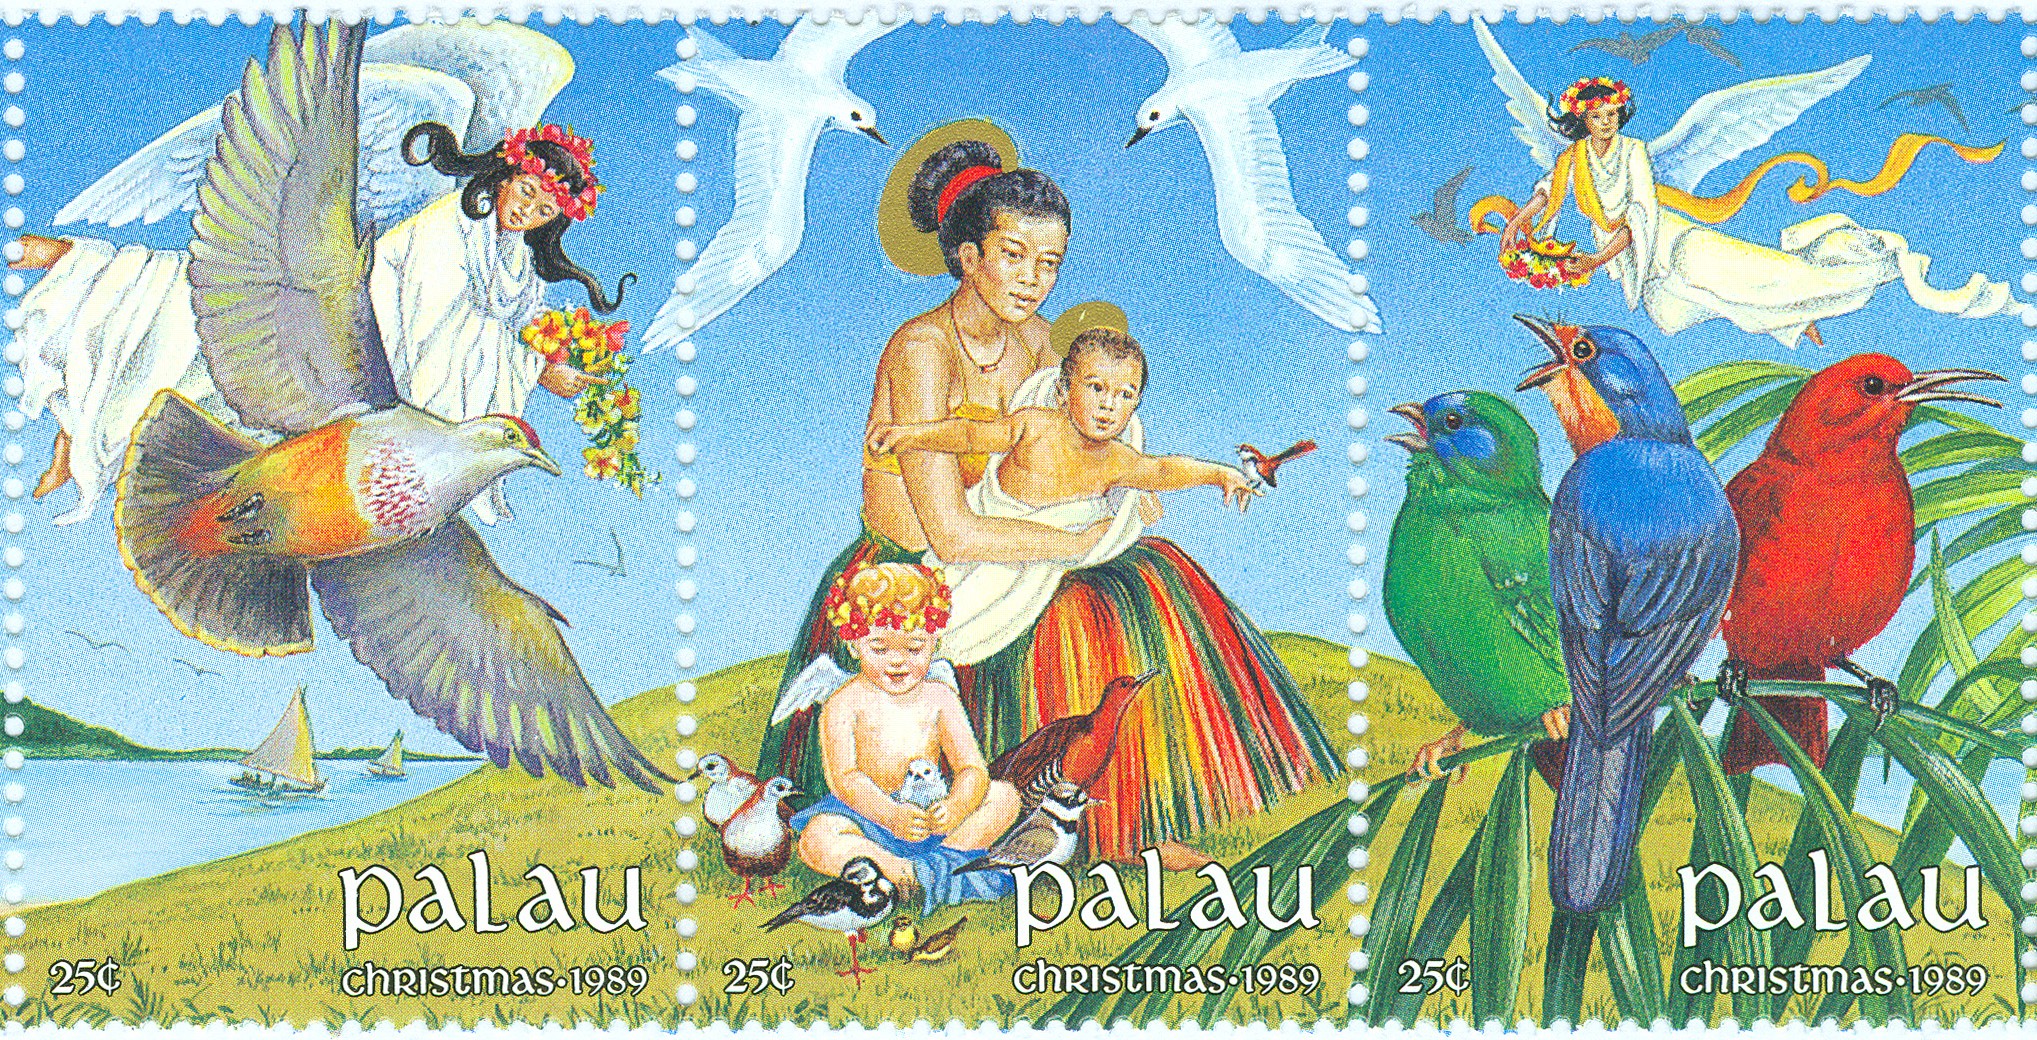 This is a series of Christmas postage stamps (1989) from Palau.